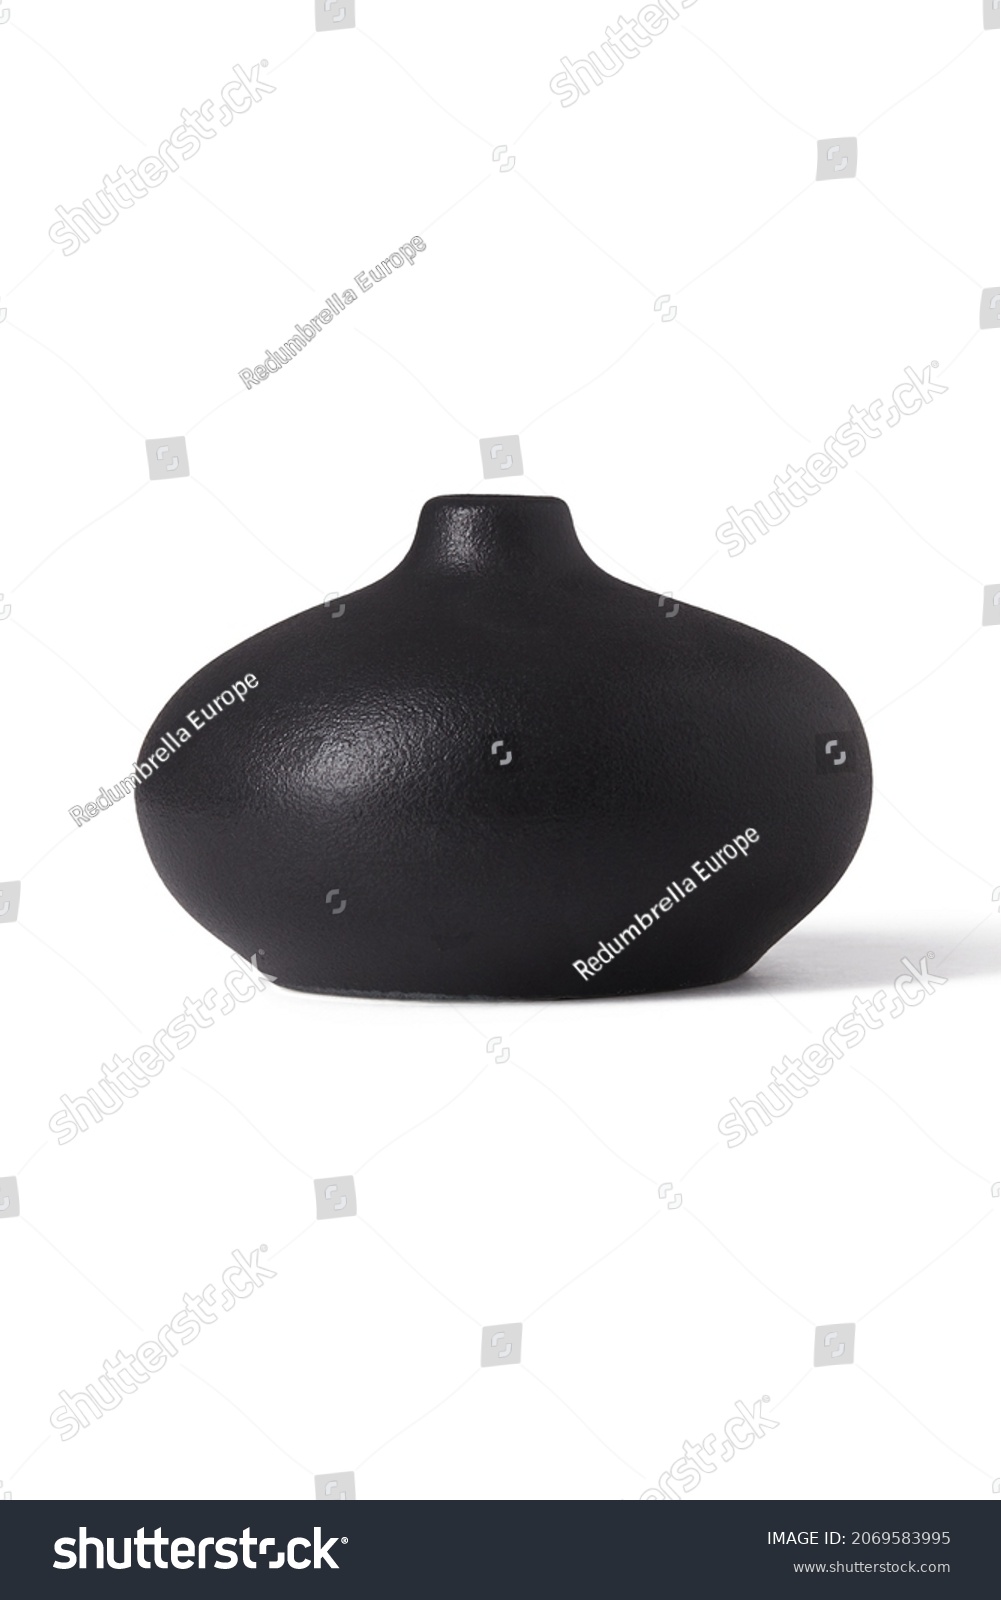 Detailed shot of a black vase. The vase is short and with a narrow neck. The surface of the vase is textured. The black decor item is isolated on the white background. #2069583995